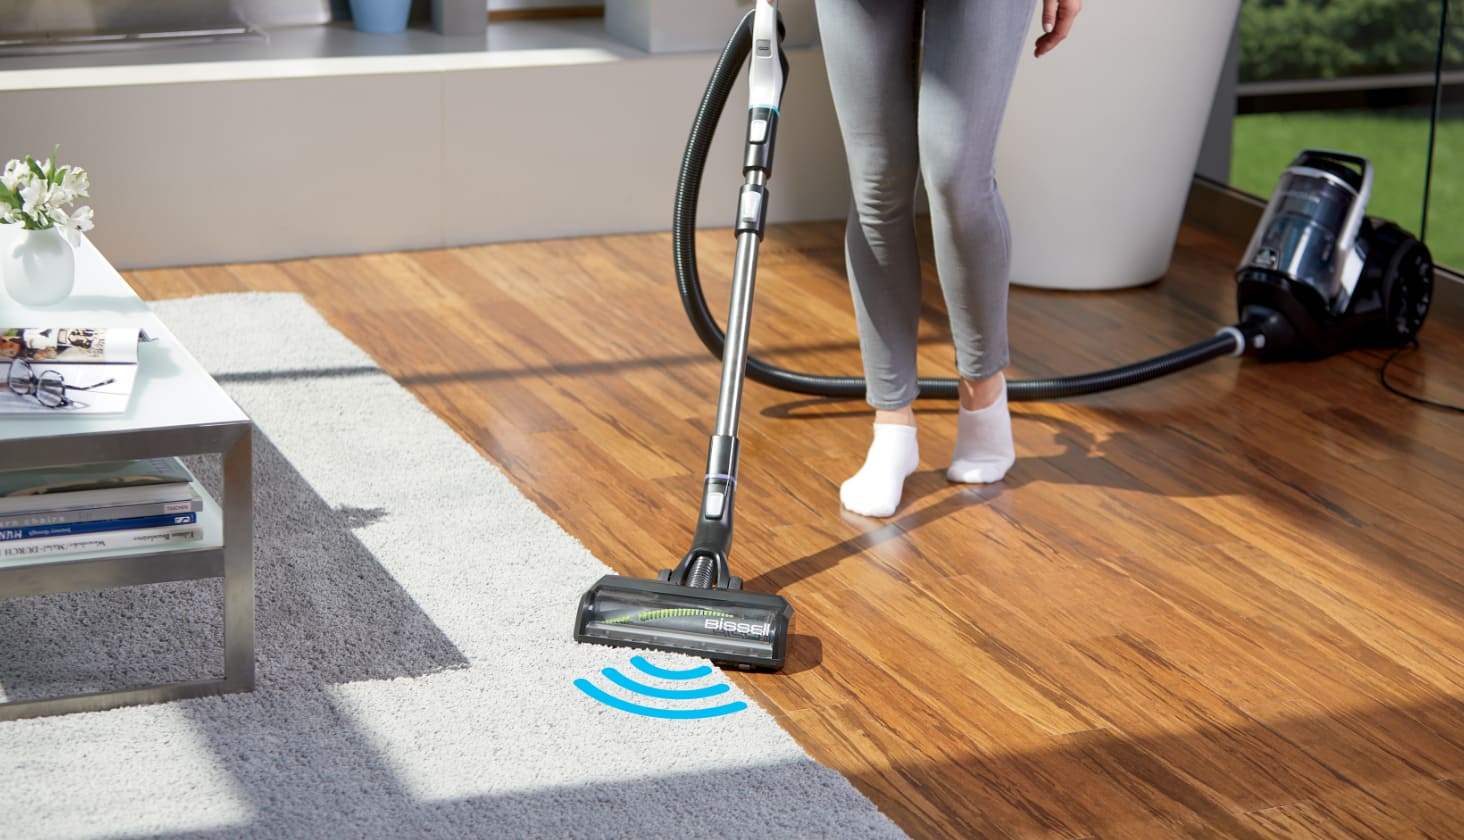 Woman uses a canister vacuum on a white rug.